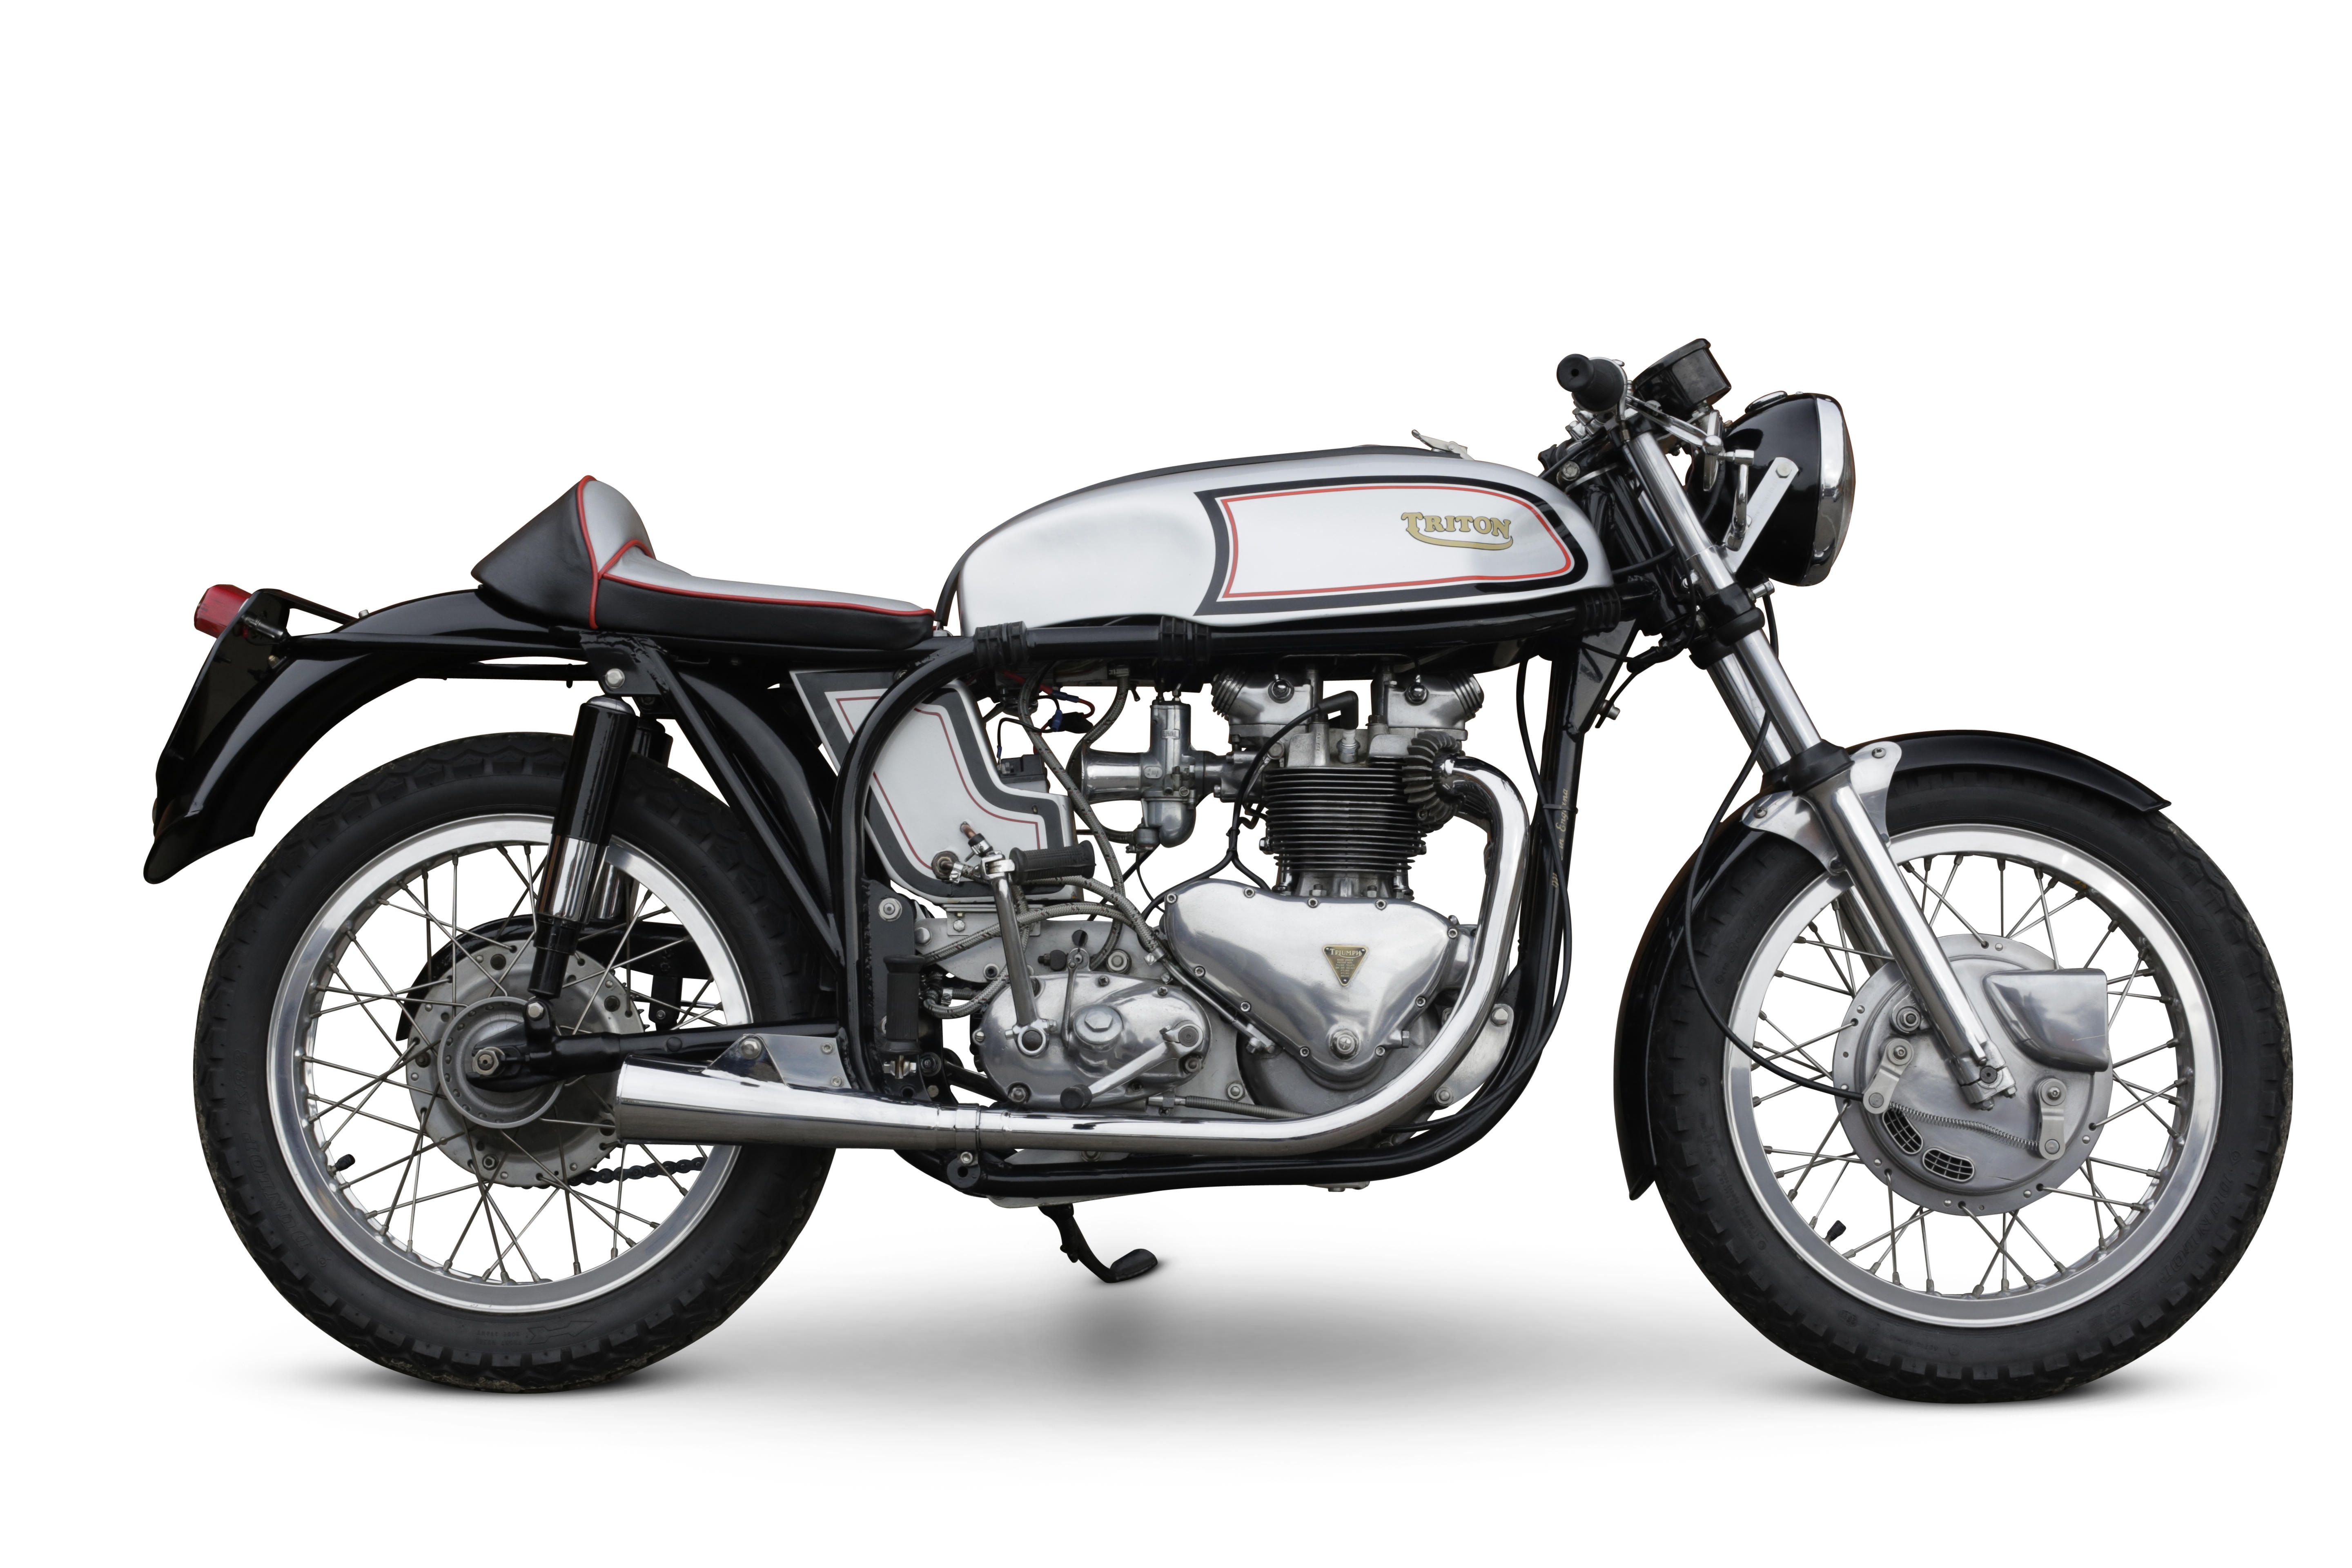 Top 12 – May and Hammond bikes for auction